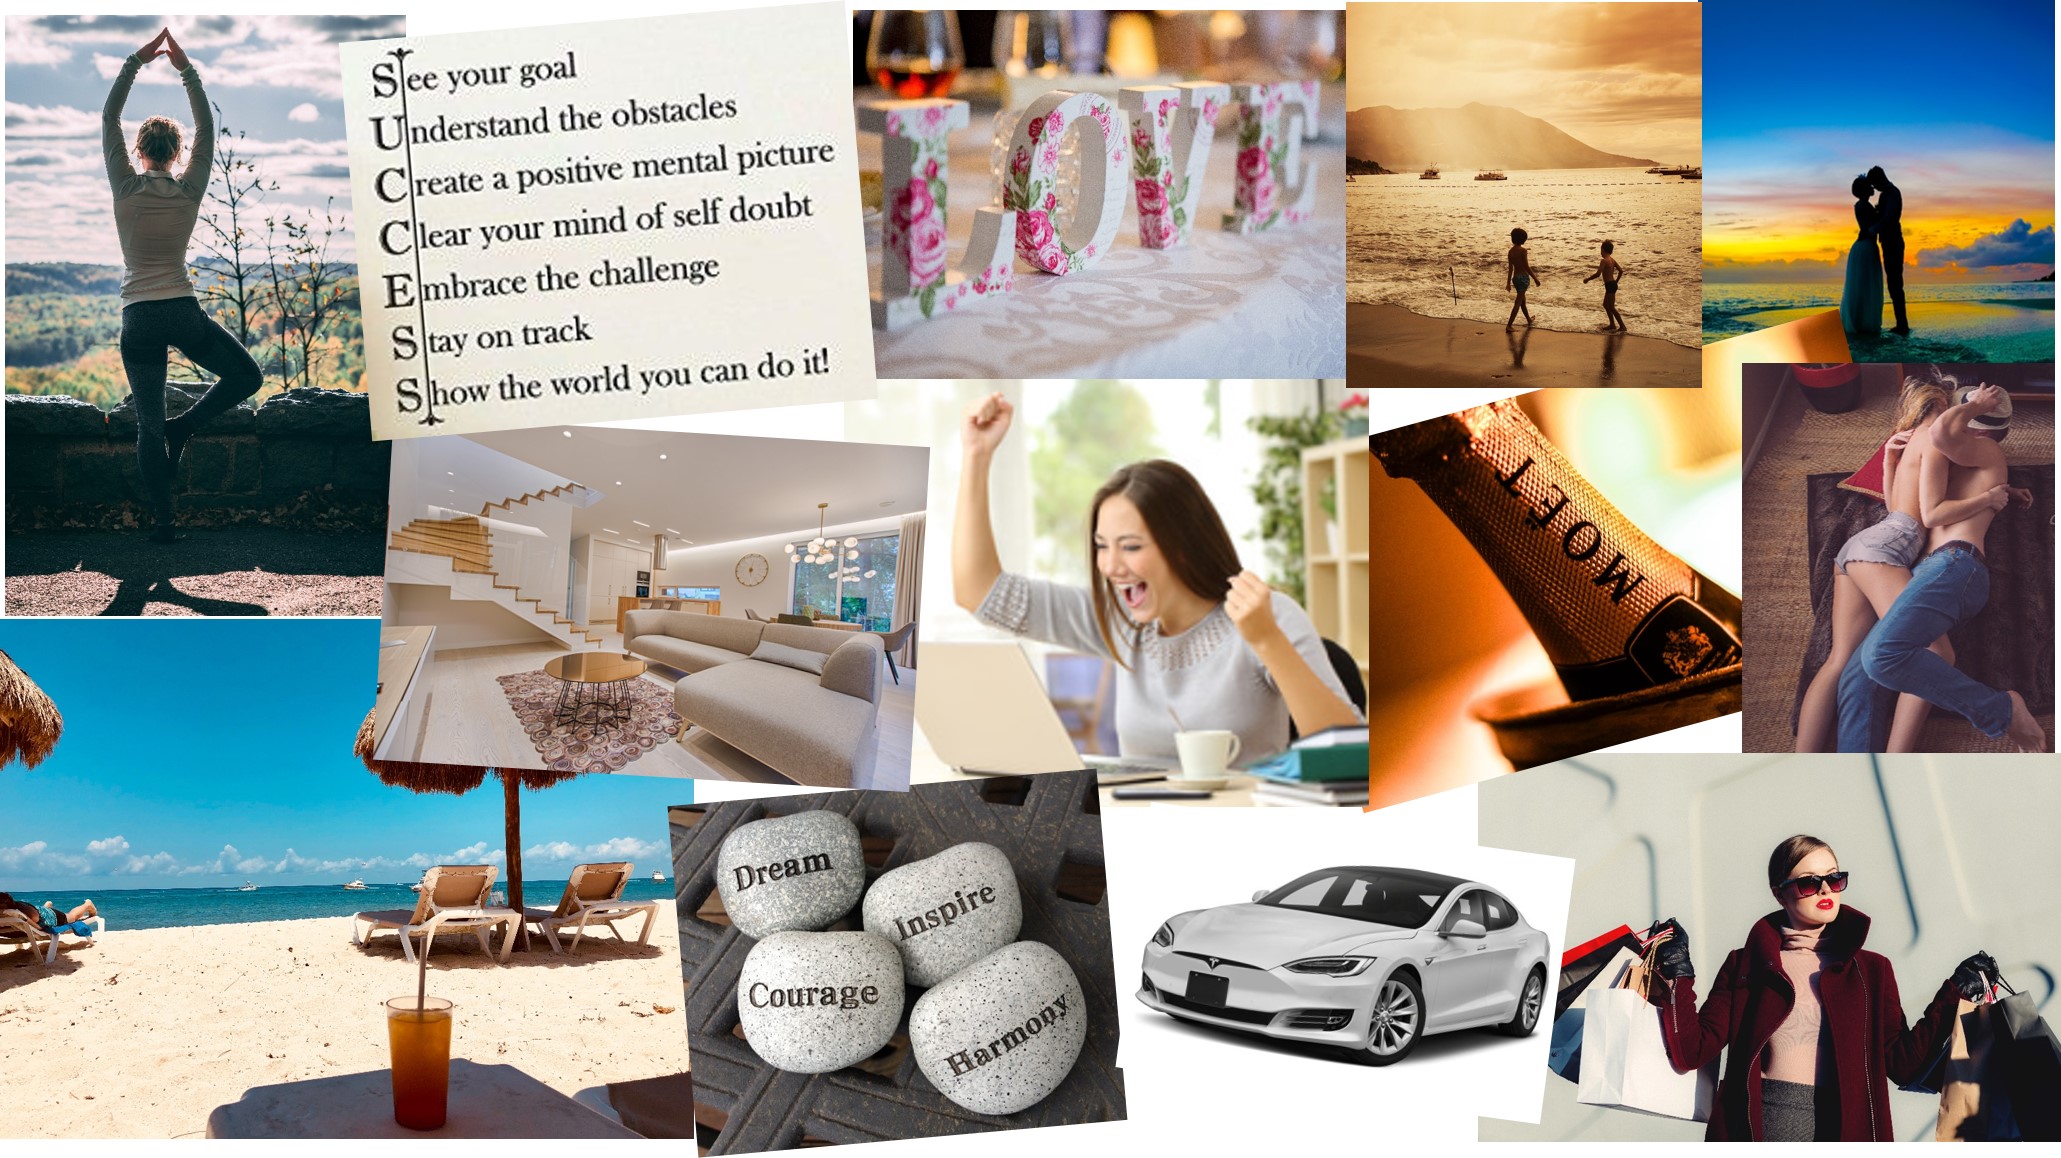 Visualize Your Success: 15 Empowering Vision Board Pictures to Manifest  Your Dreams! - The Planner Addict